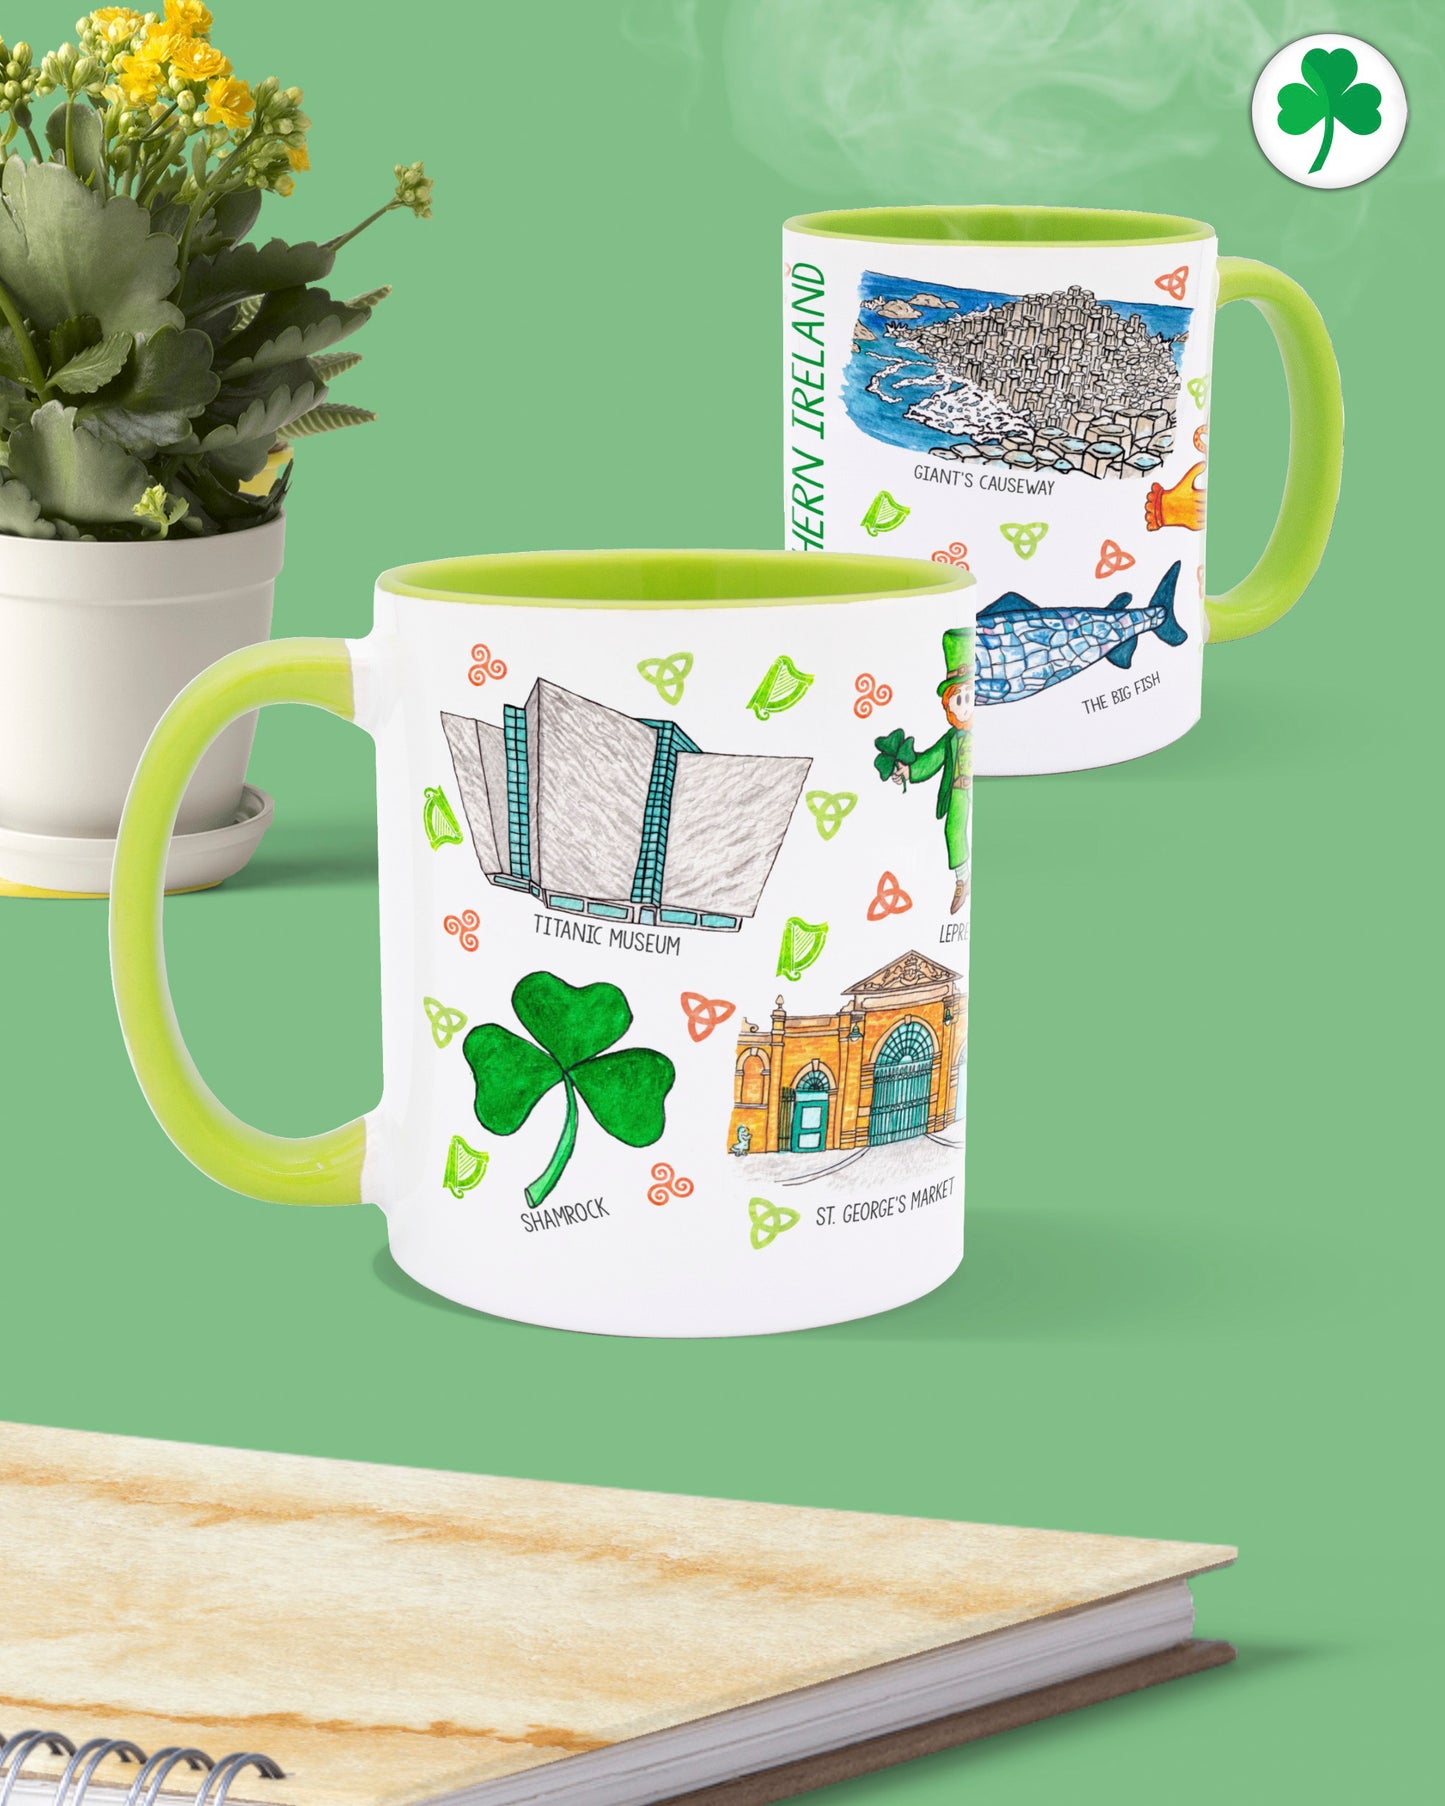 Northern Ireland Mugs - To Home From London